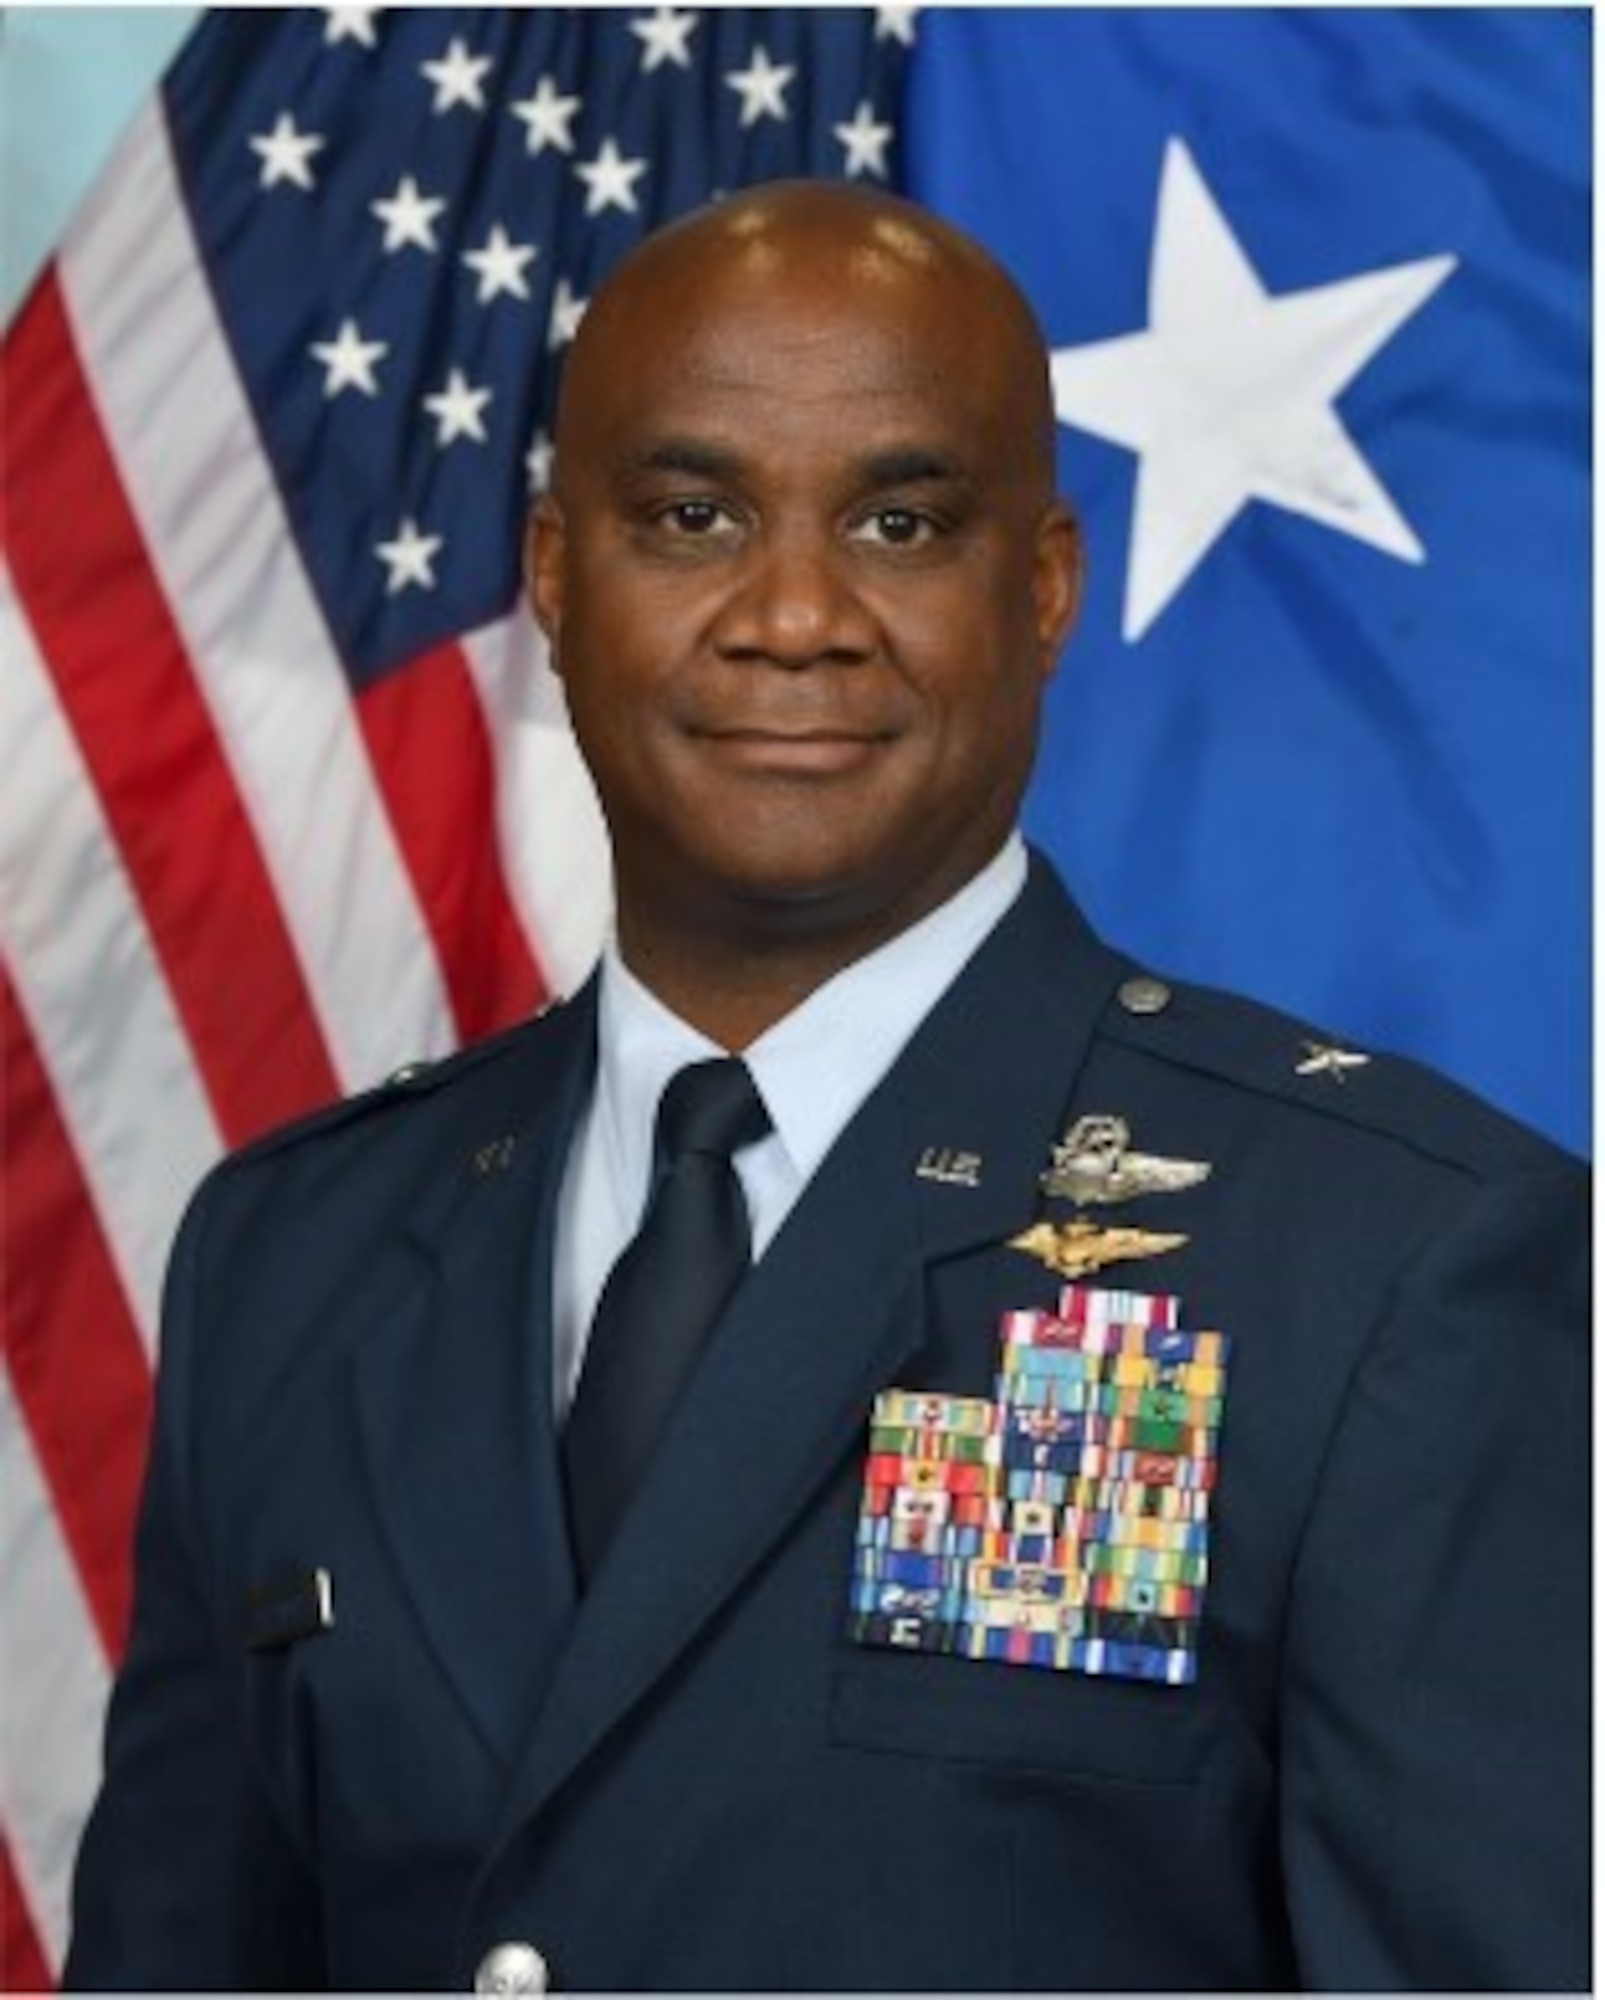 U.S. Air Force Brig. Gen. Jeffrey R. Alexander, director of Air Force Global Strike Command A5/A8 Strategic Plans, Program and Requirements, and Chief of Staff of the Michigan Air National Guard, poses for a photo. Alexander was named the 2023 U.S. Air Force Black Engineer of the Year Stars and Stripes Honoree due to his outstanding contributions as a leader both with AFGSC and the Michigan Air National Guard, as well as being a positive role model for those aspiring to have careers in STEM in both the public and private sectors. (U.S. Air Force courtesy photo)